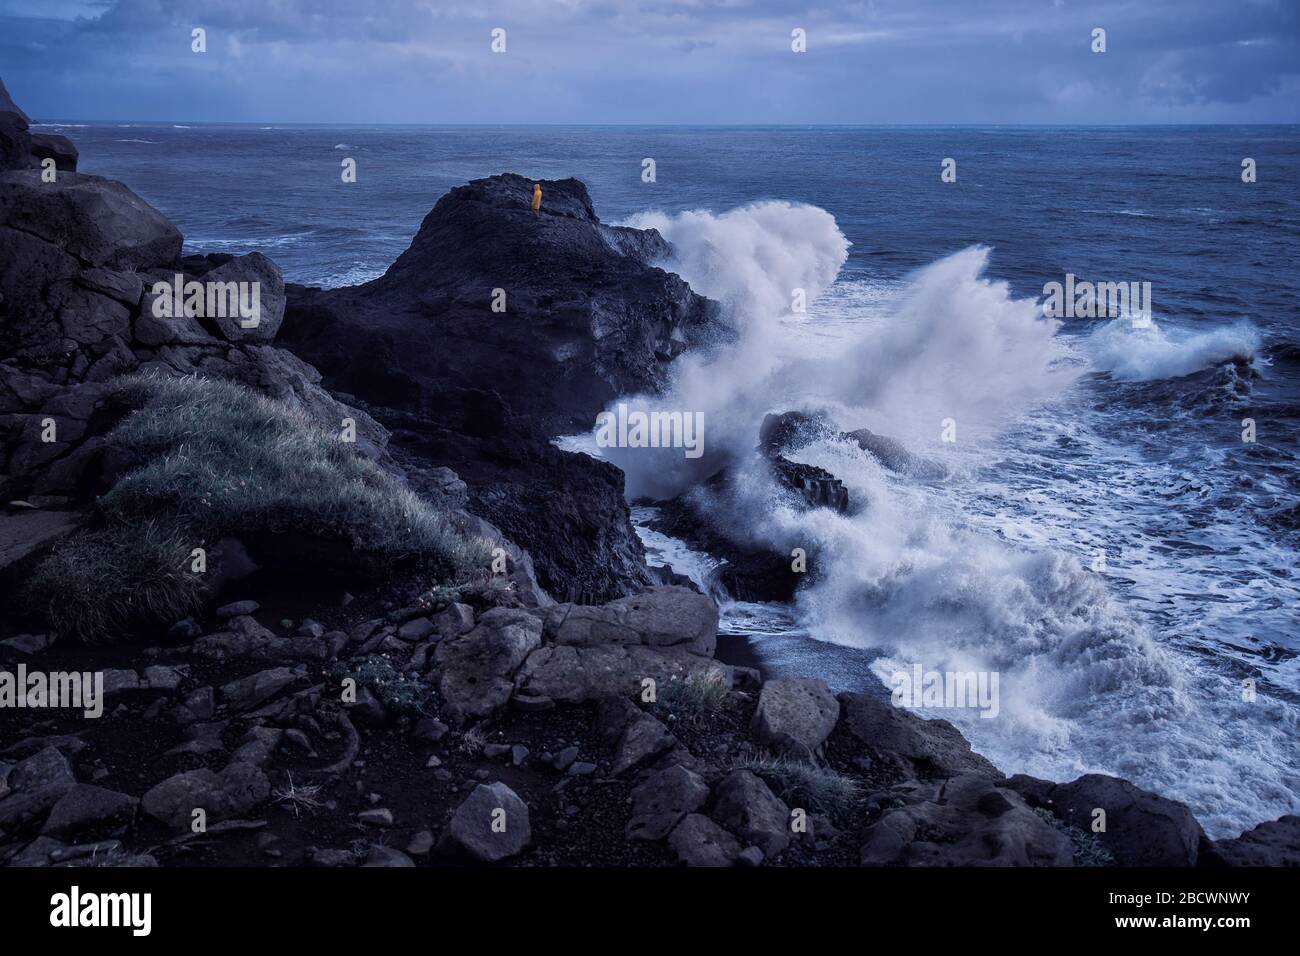 man in yellow raincoat standing at edge of cliff with huge waves breaking against it on stormy day in Dyrholaey, Iceland Stock Photo